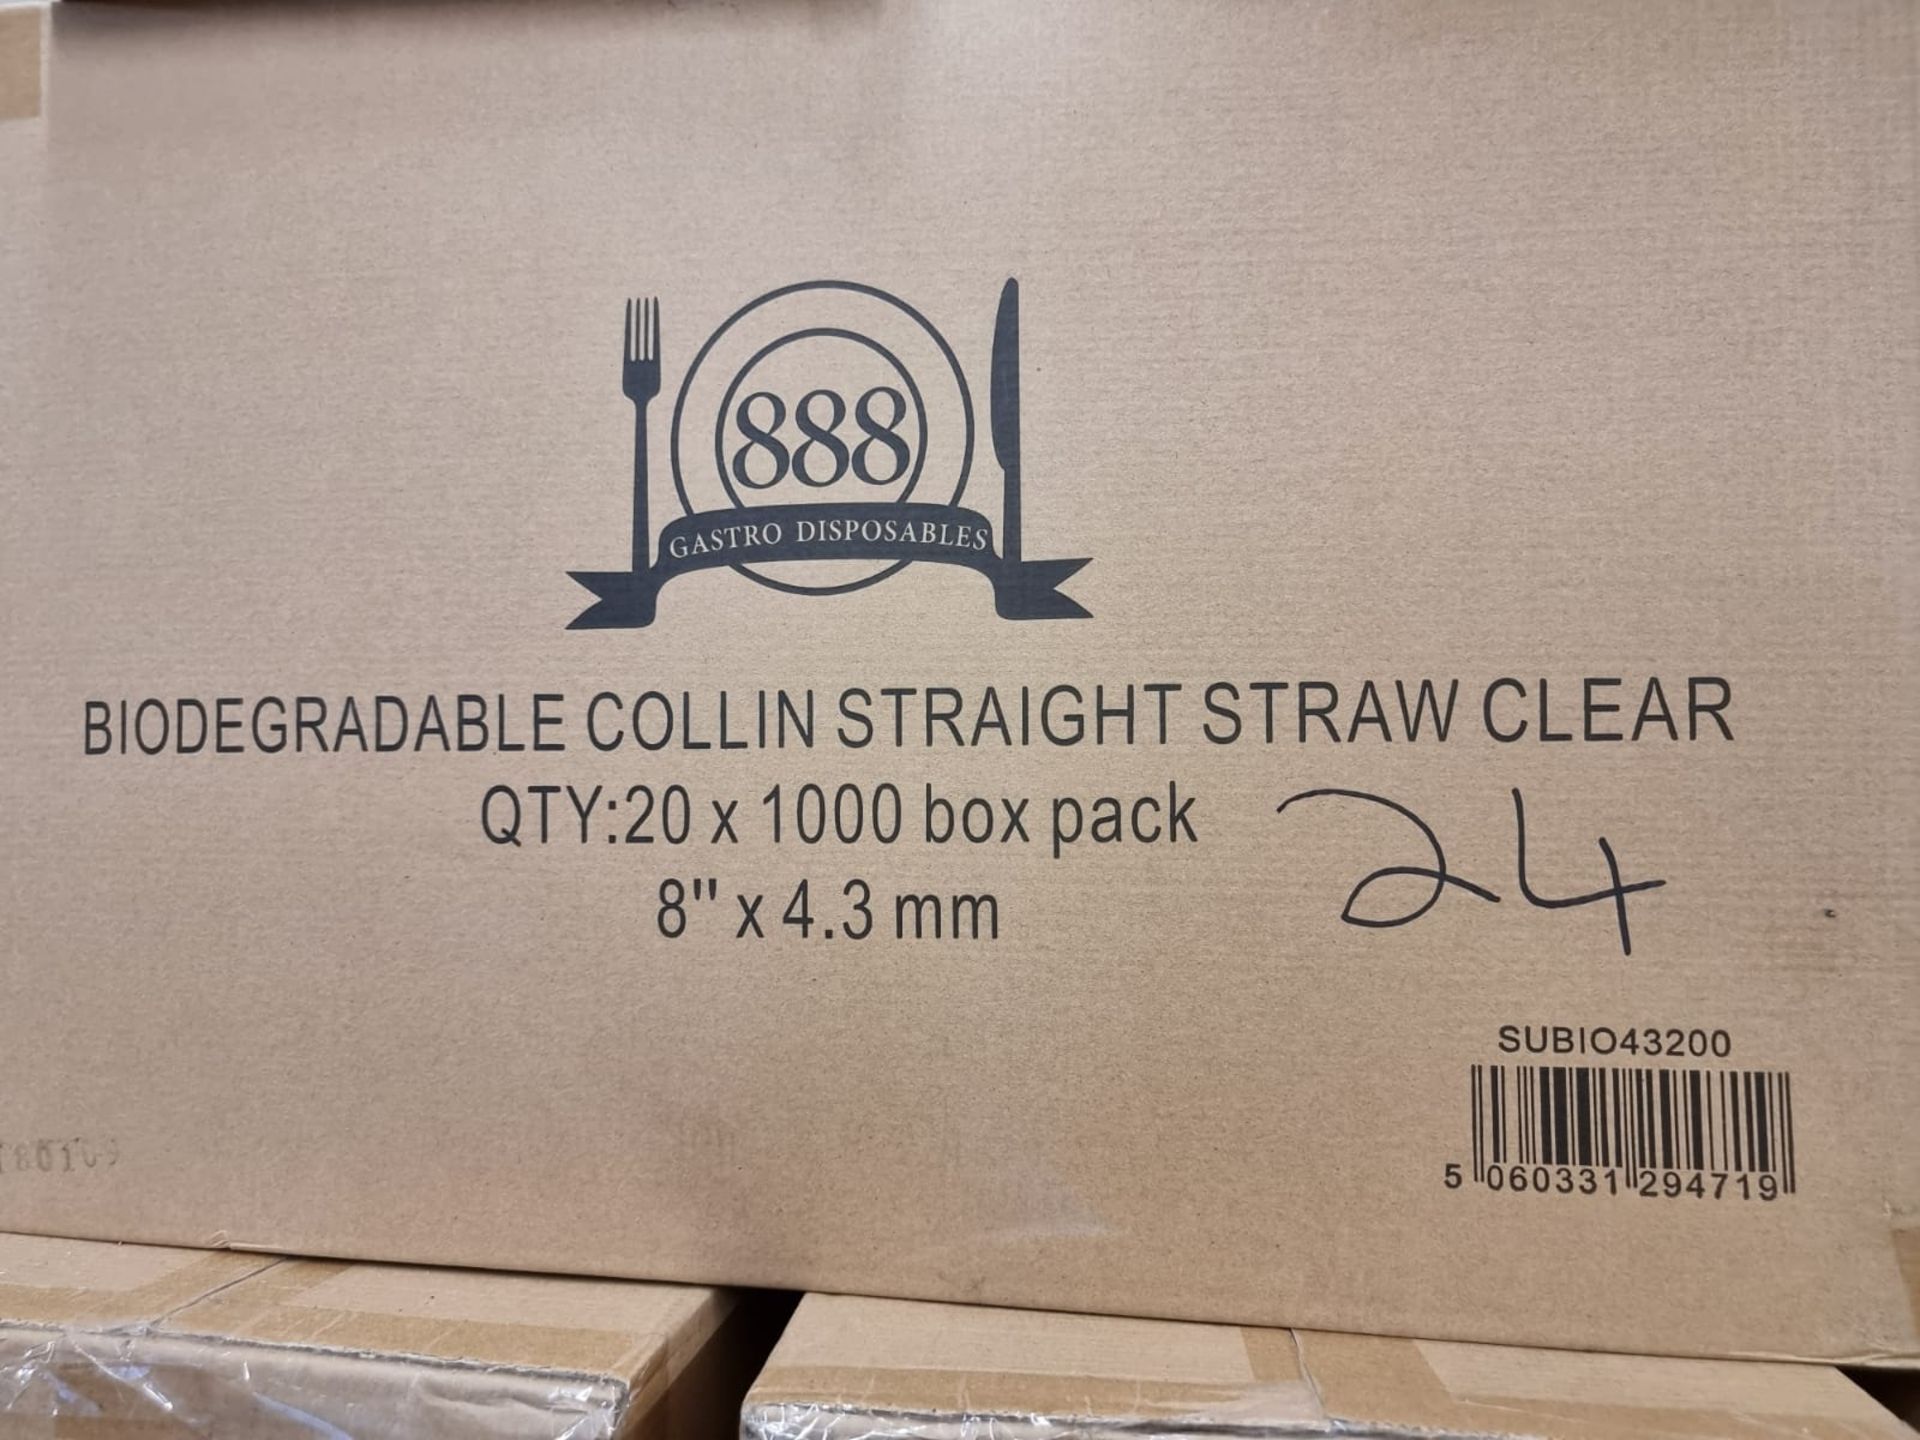 Approx 480,000 BIODEGRADABLE Collins Straw | Clear - Image 2 of 3